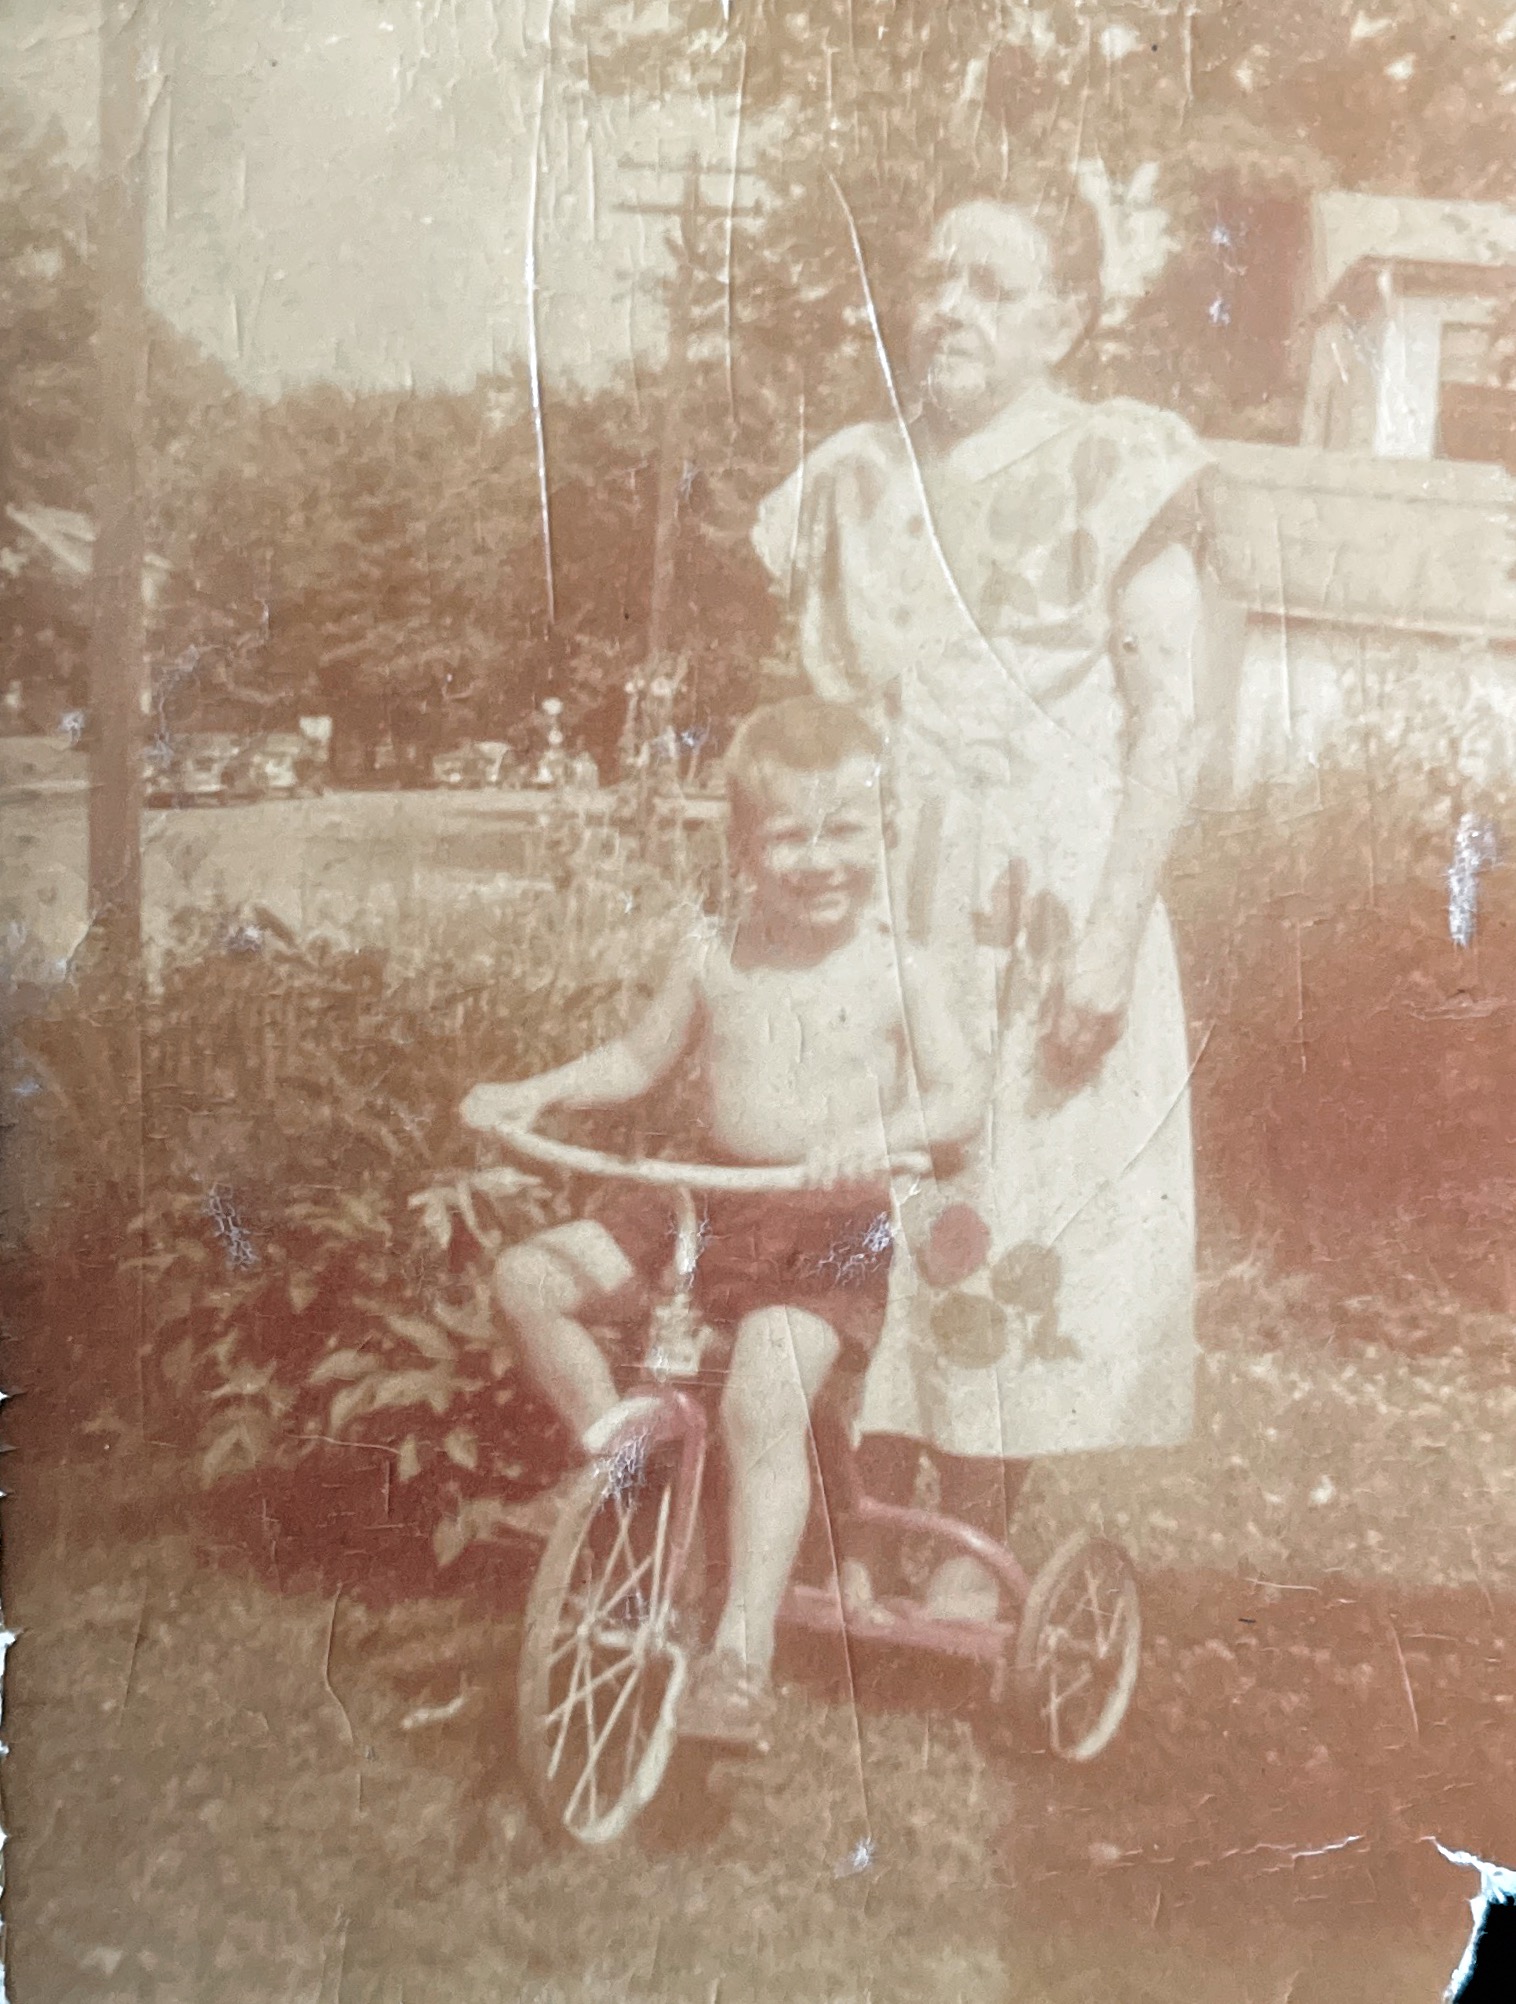 Billy Plummer with his Aunt Carrie, Aug 28, 1950.